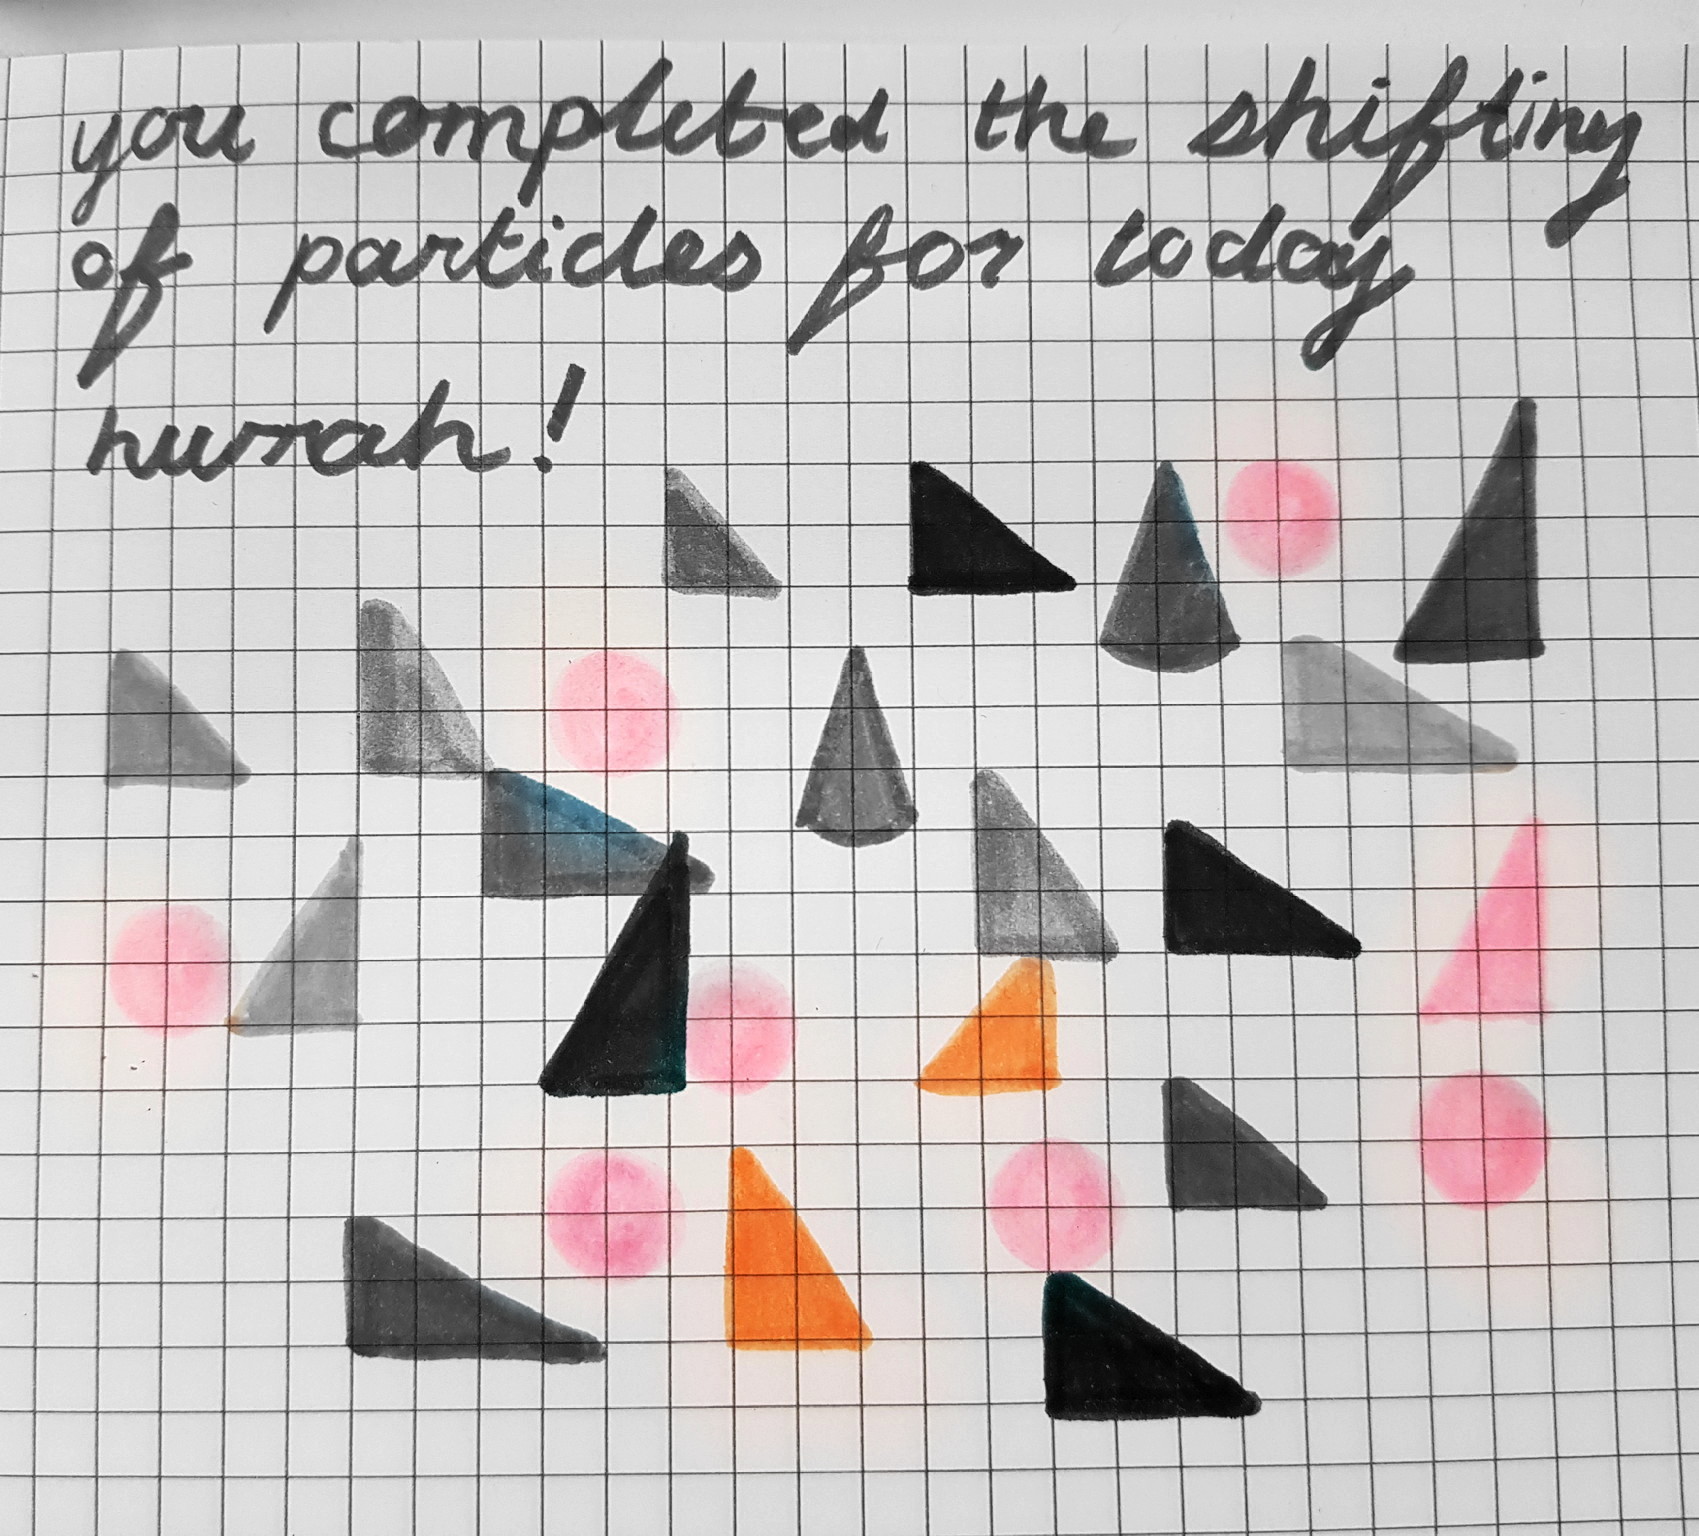 A piece of graph paper with 'You completed the shifting of particles for today. Hurrah!' hand-written at the top. Triangles and circles drawn below.